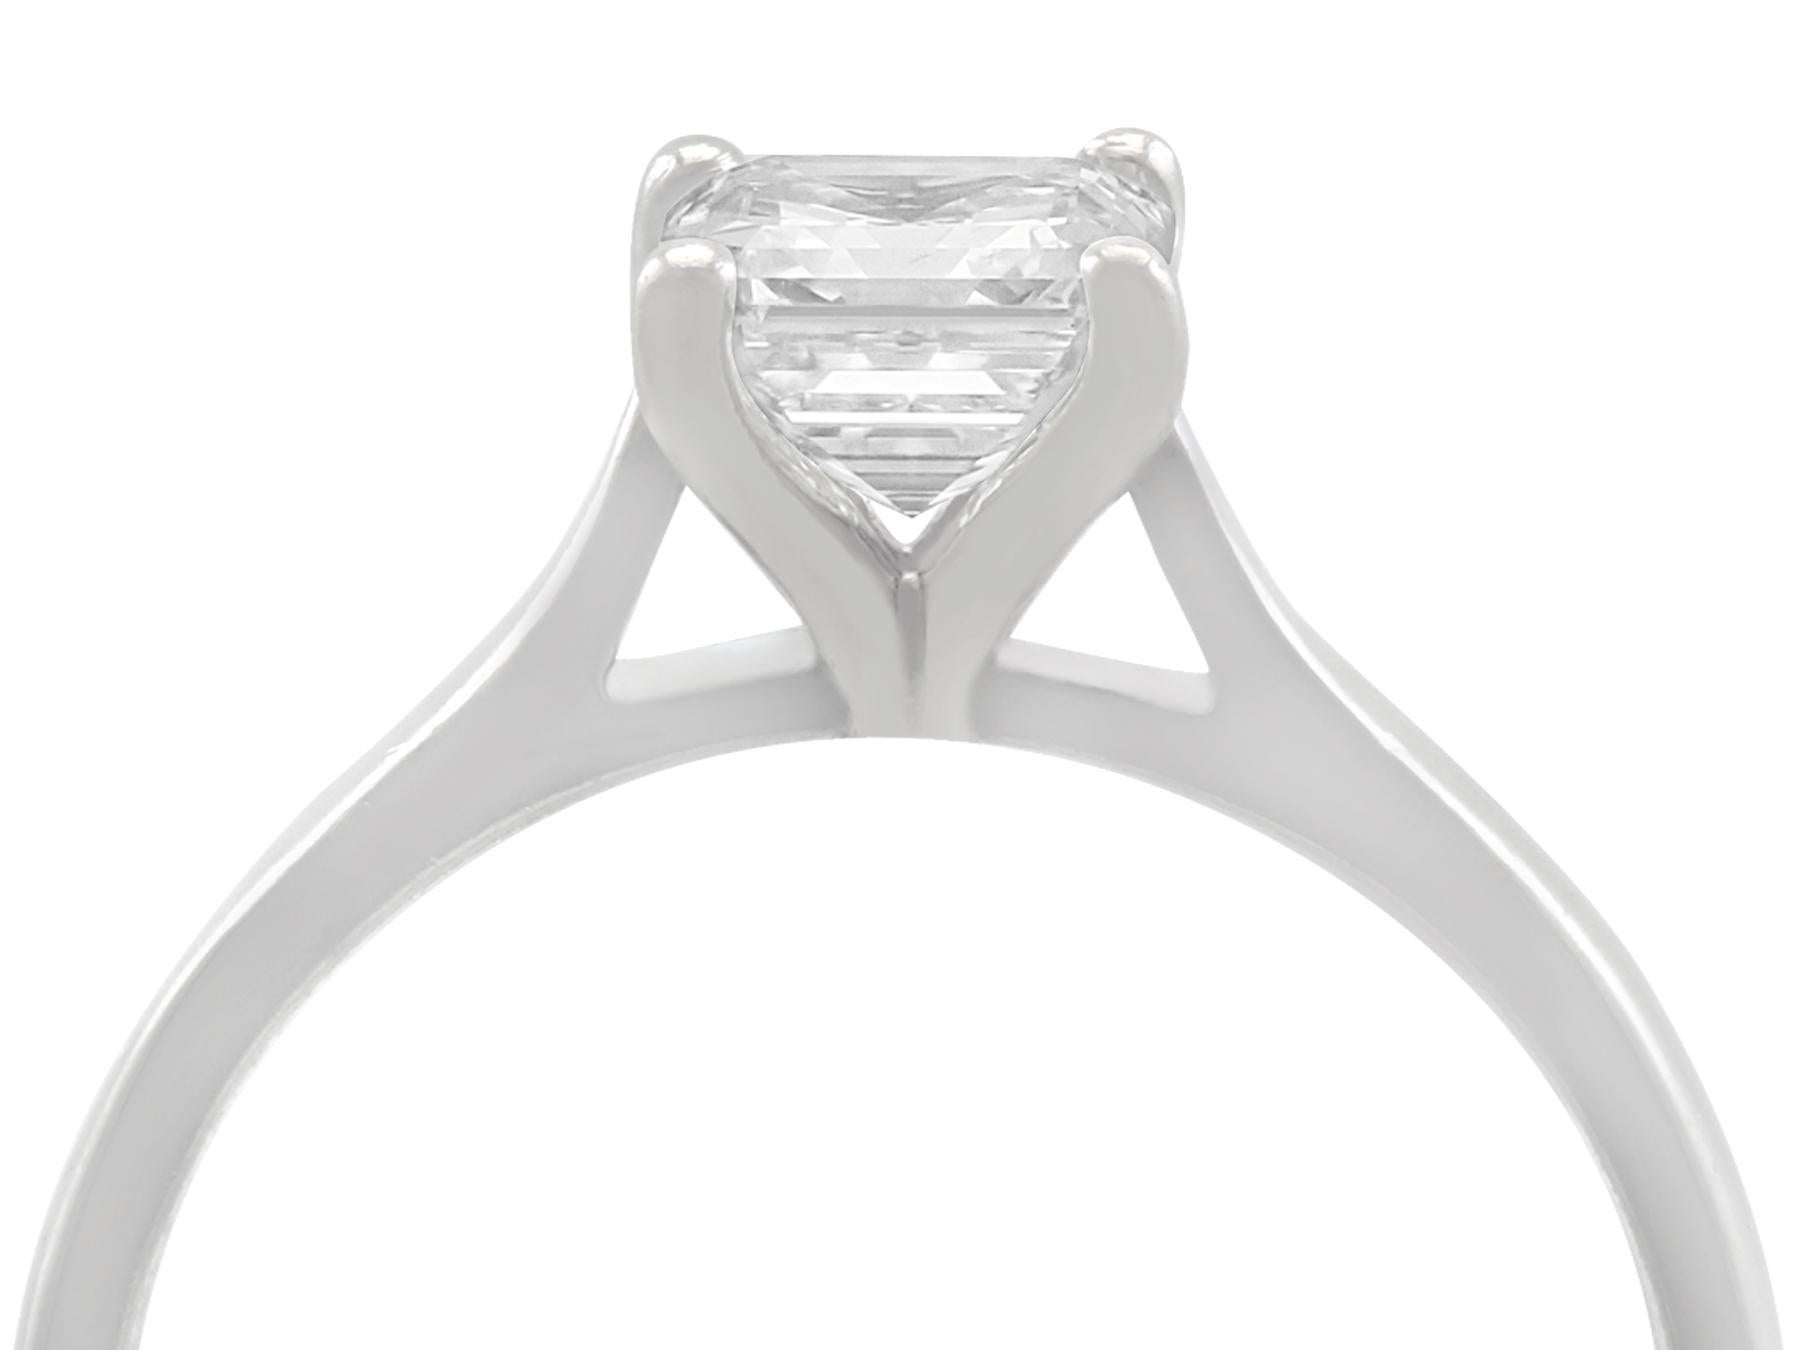 A fine and impressive contemporary 0.97 carat diamond and platinum ring; part of our contemporary diamond jewelry collection.

This impressive contemporary diamond solitaire ring has been crafted in platinum.

The 0.97Ct emerald square cut* diamond